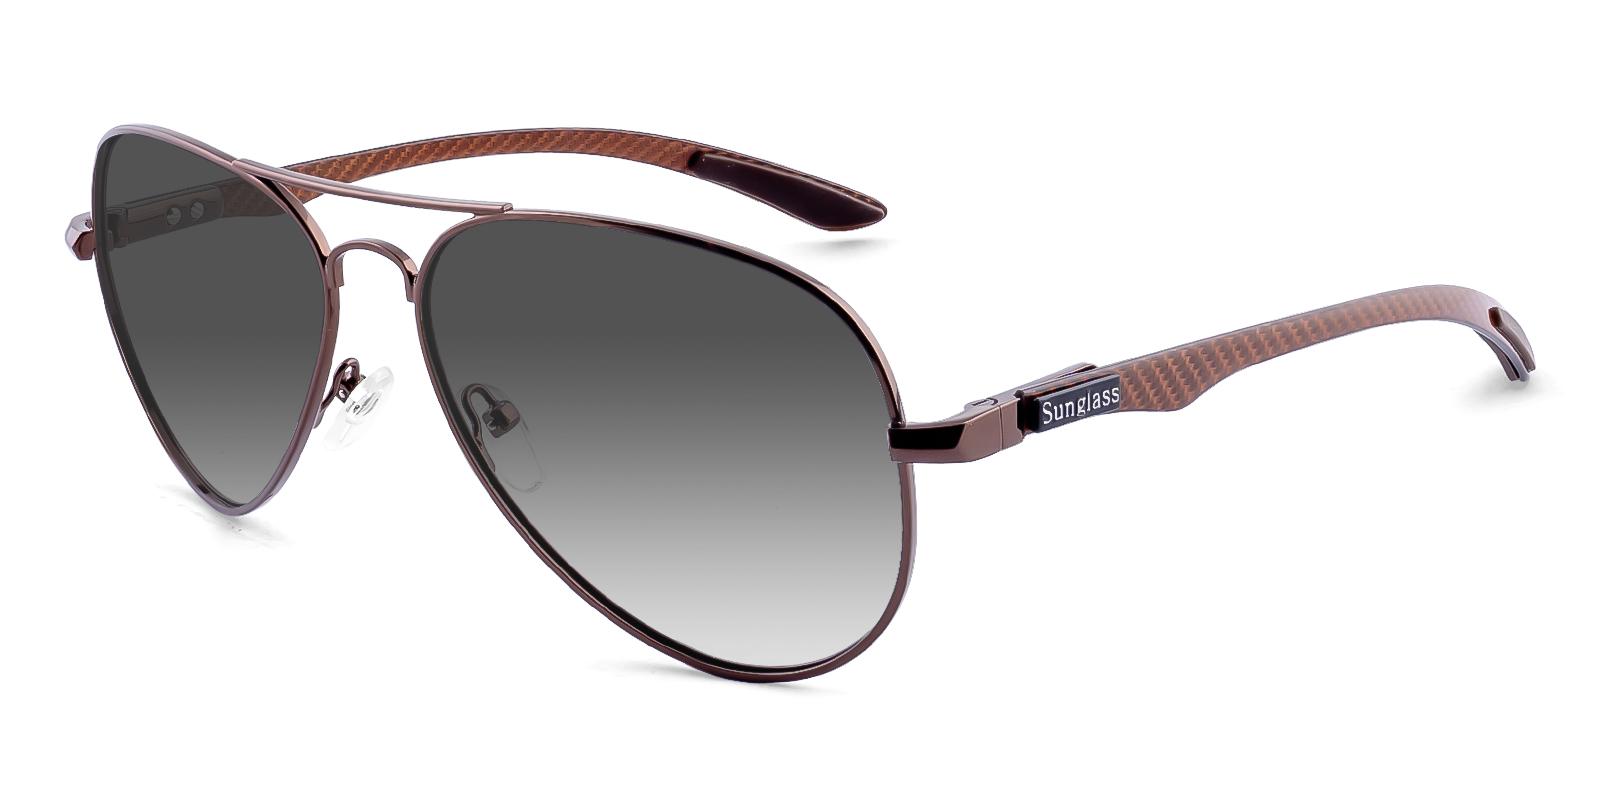 Amplster Brown Metal Sunglasses , NosePads Frames from ABBE Glasses